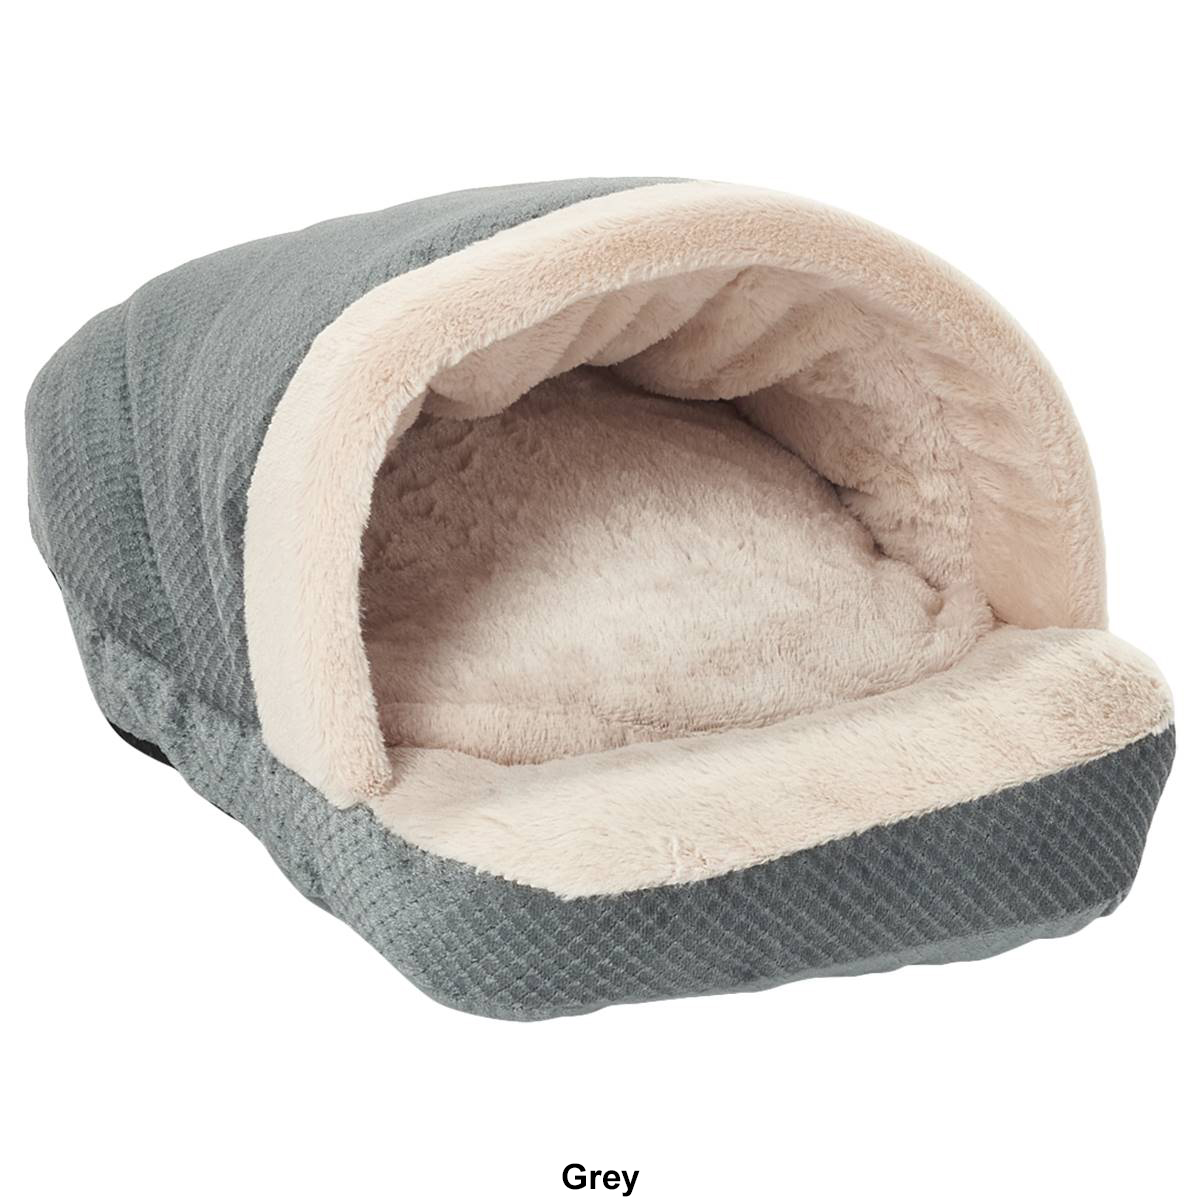 Comfortable Pet Covered Cat Bed